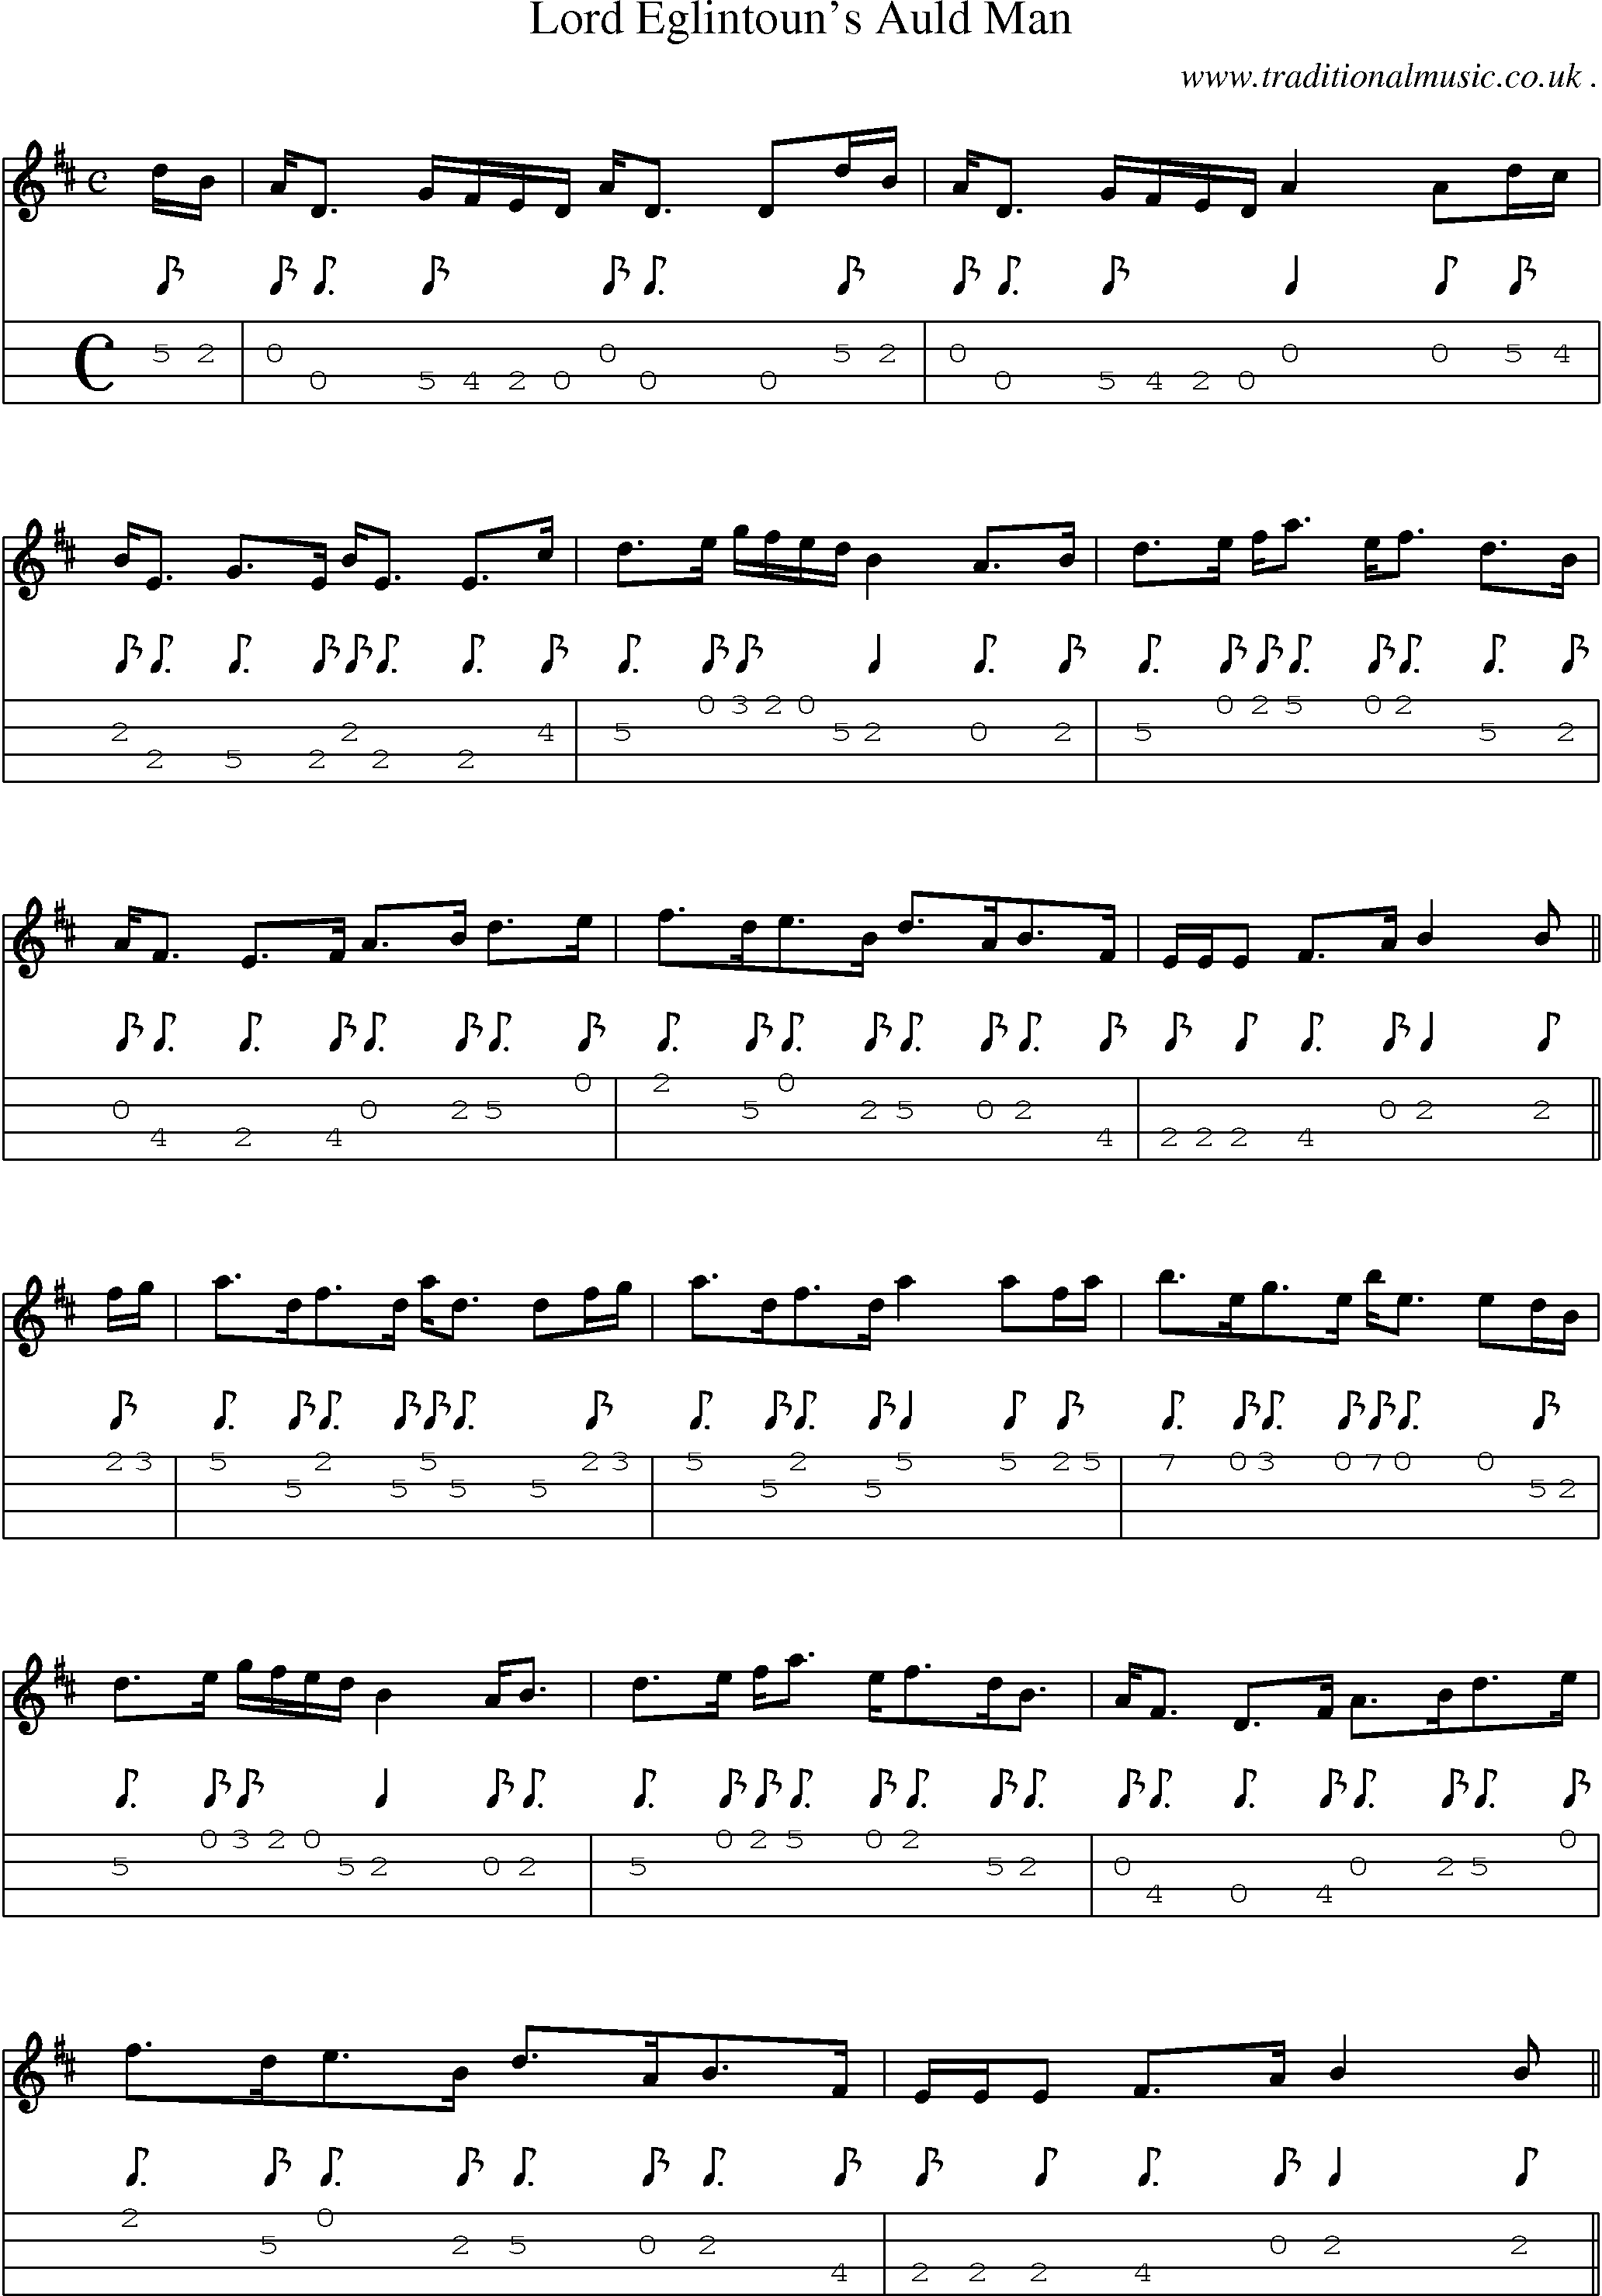 Sheet-music  score, Chords and Mandolin Tabs for Lord Eglintouns Auld Man